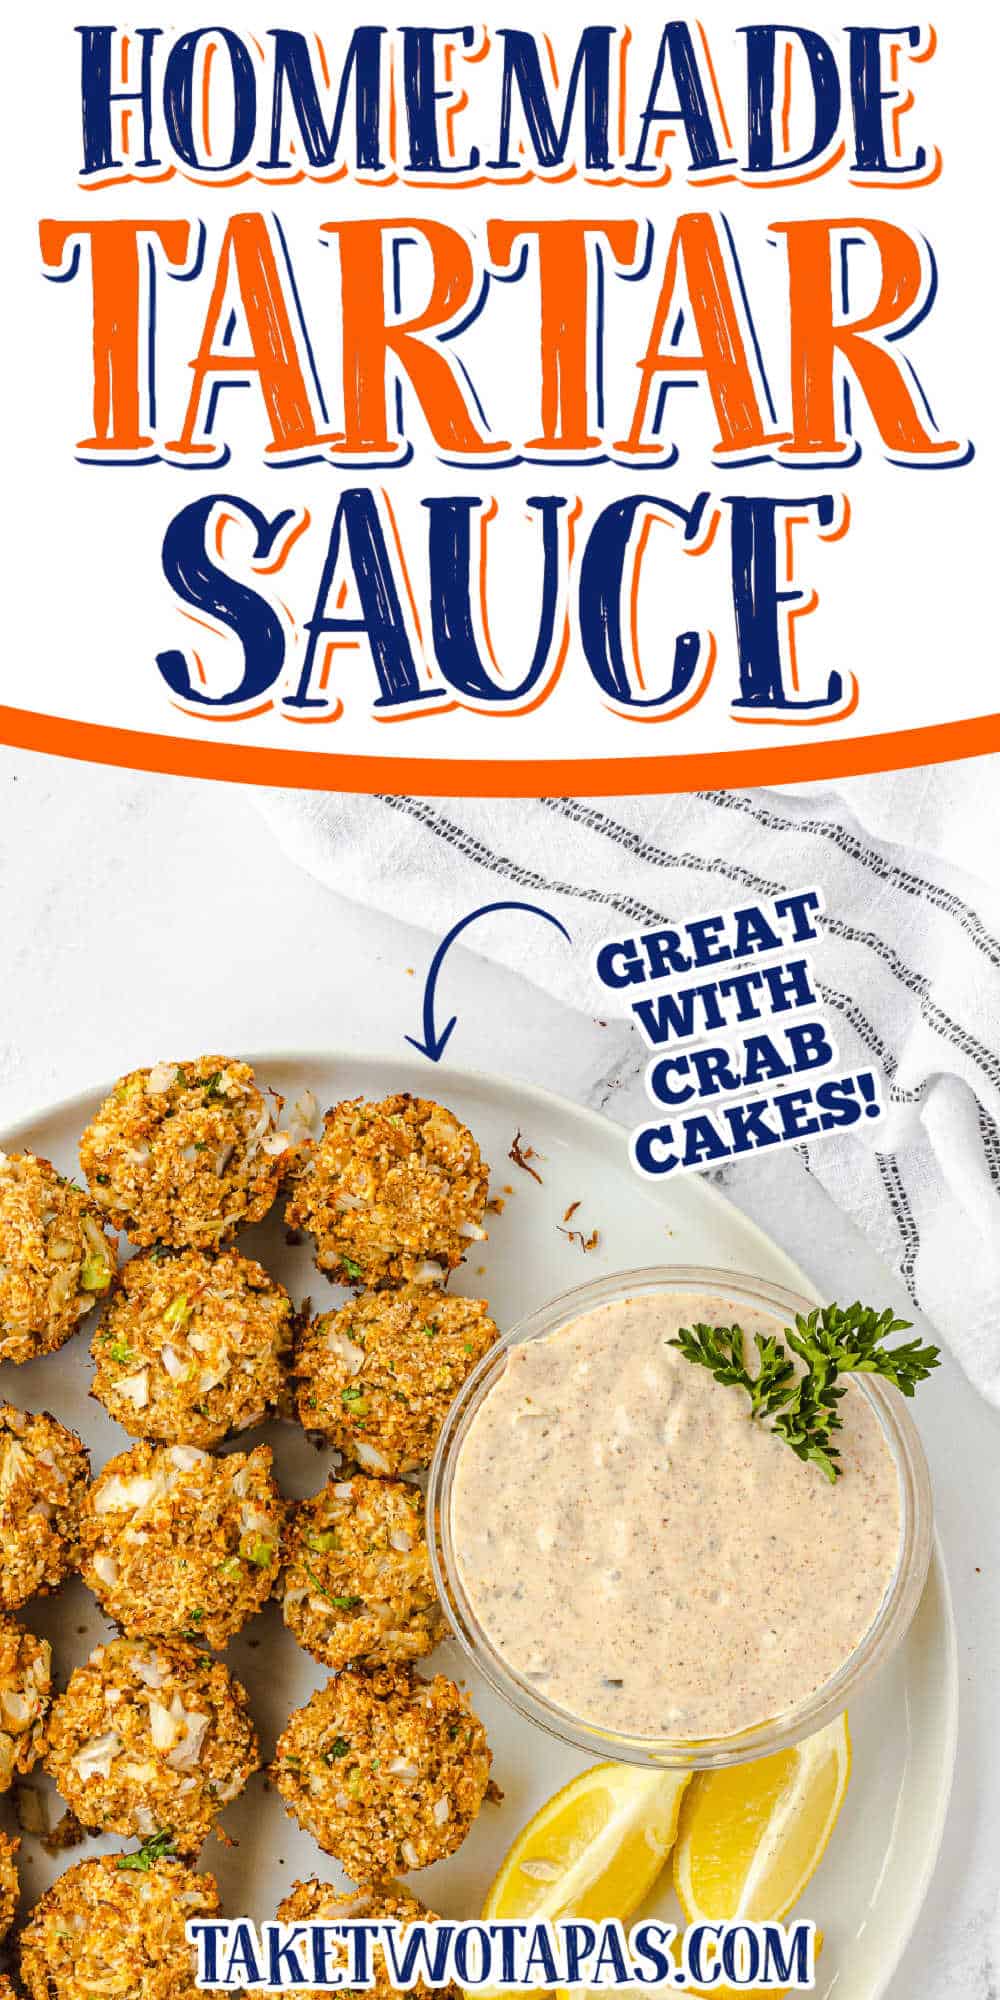 bowl of tartar sauce with text "great with crab cakes"